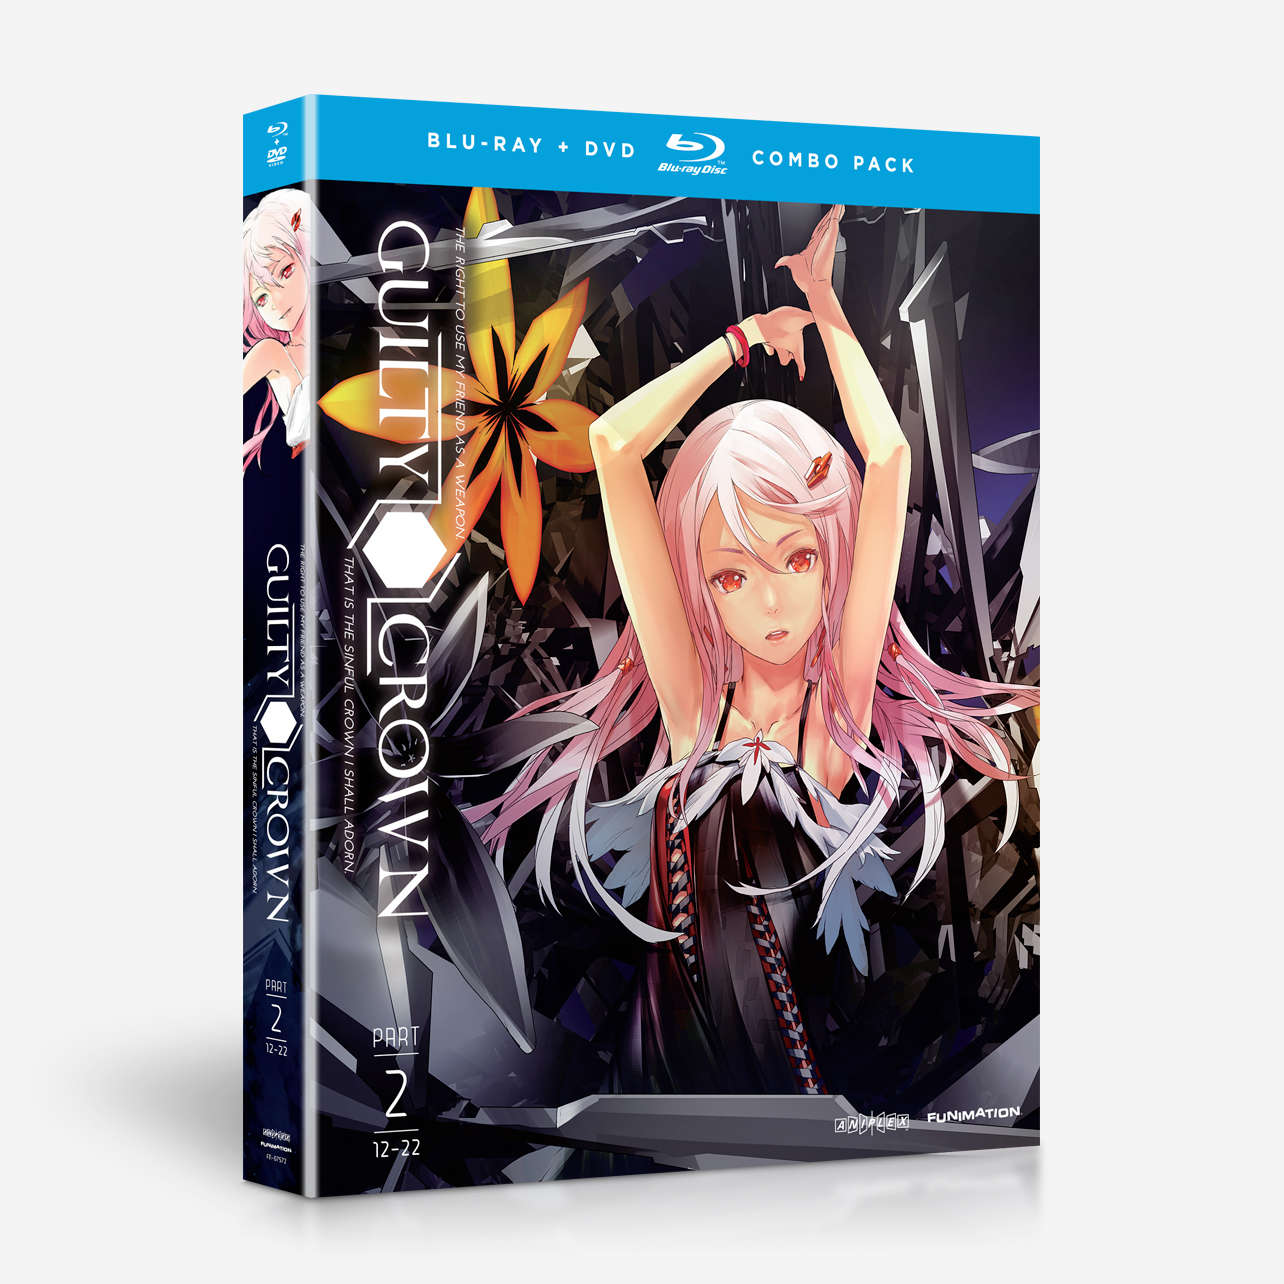 free download guilty crown funimation